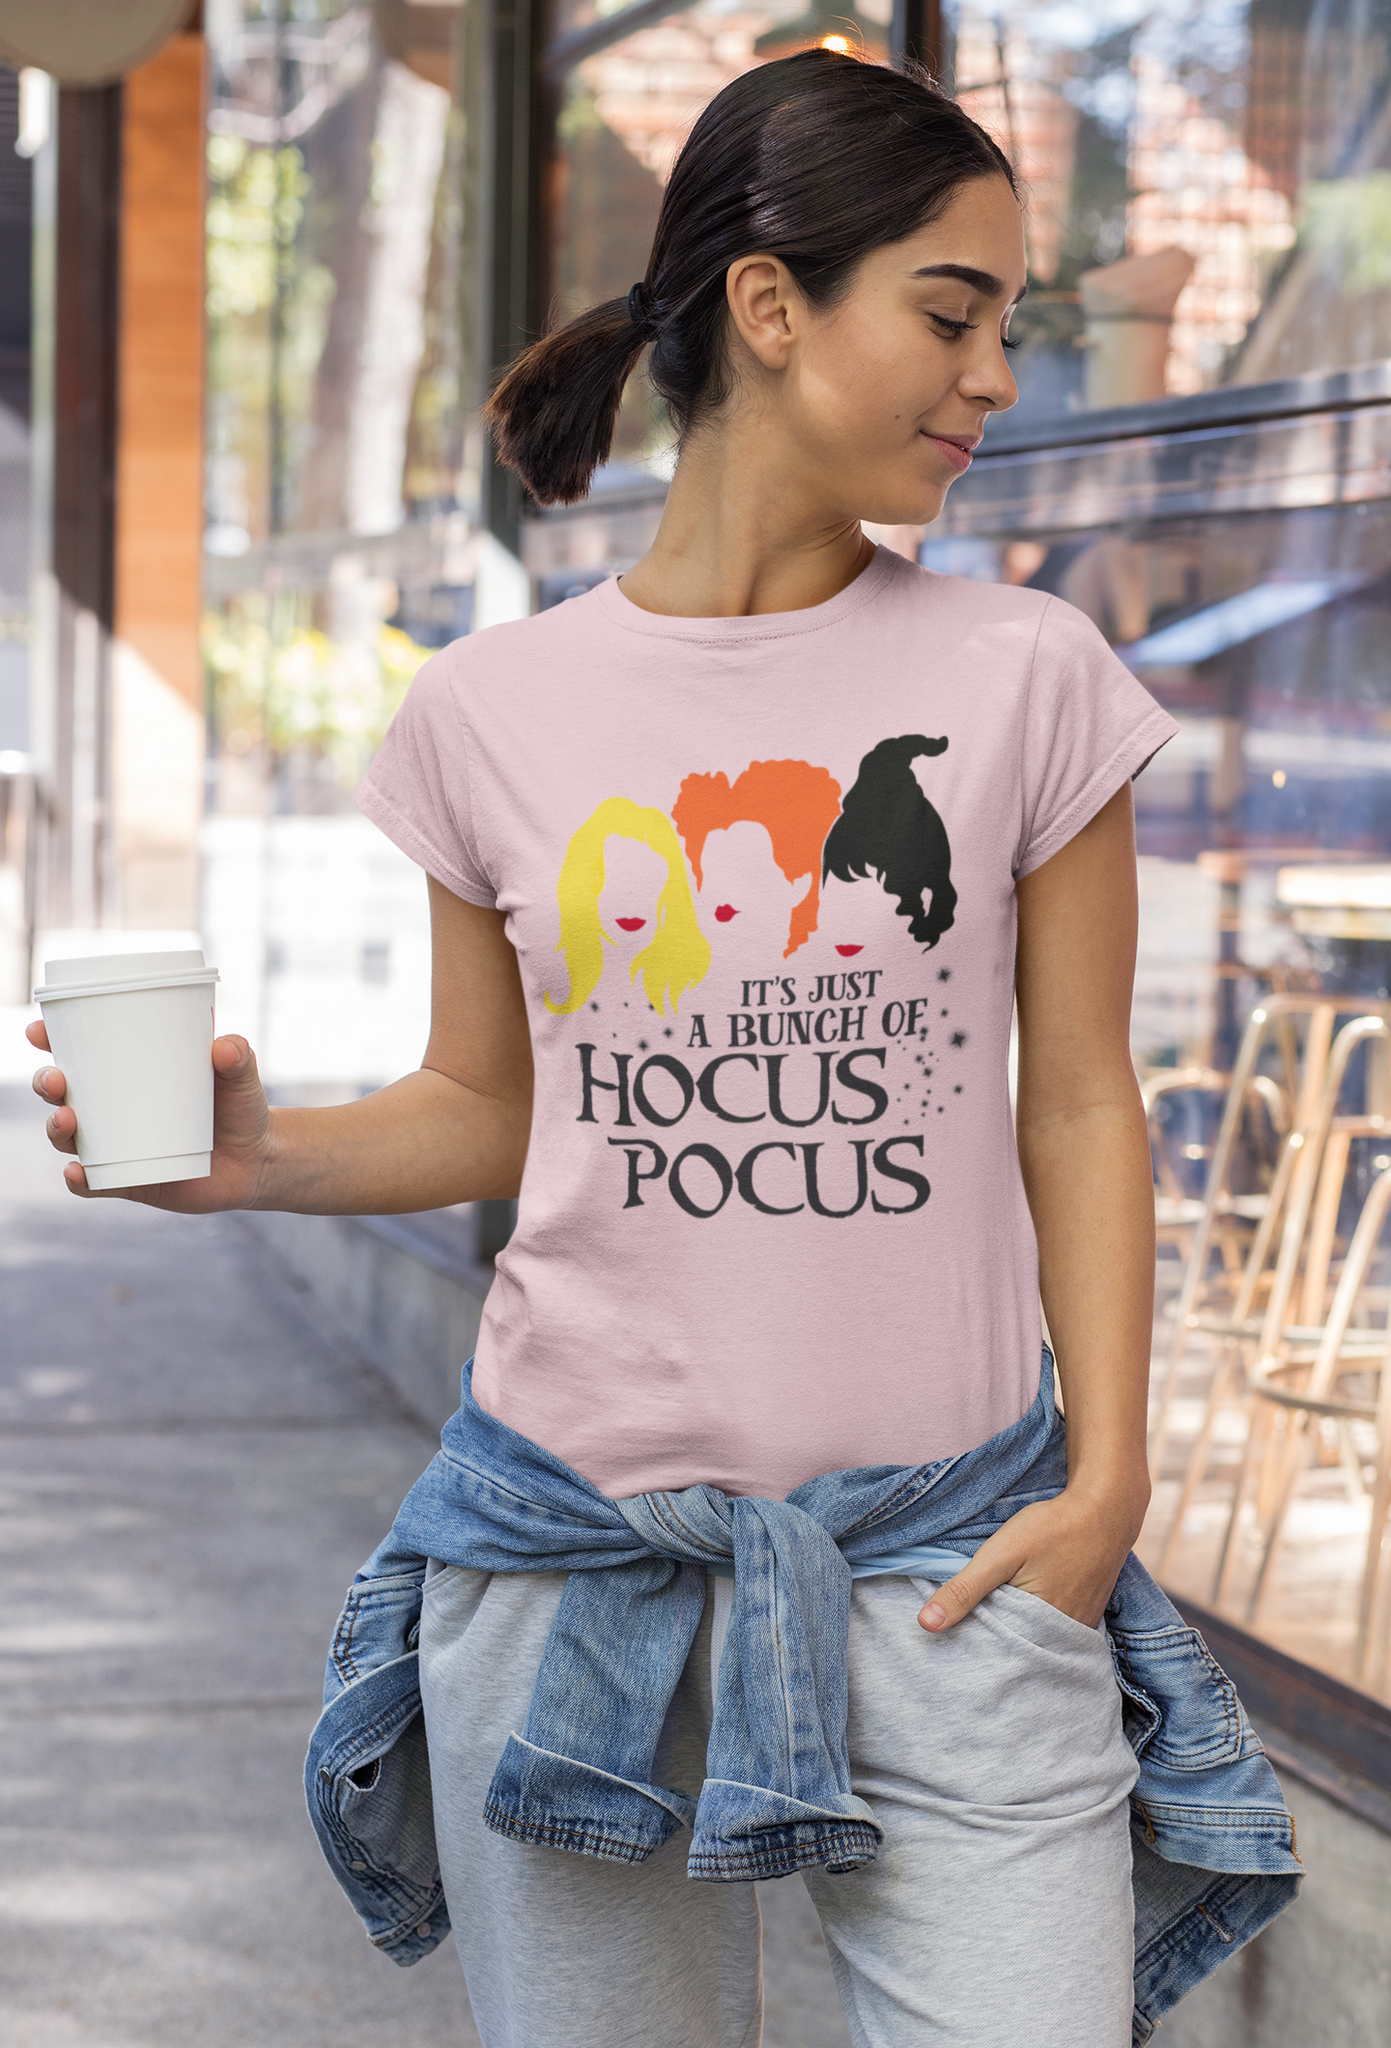 Hocus Pocus Tshirt, Its Just A Bunch Of Hocus Pocus Shirt, Sanderson Sisters T Shirt, Halloween Gifts